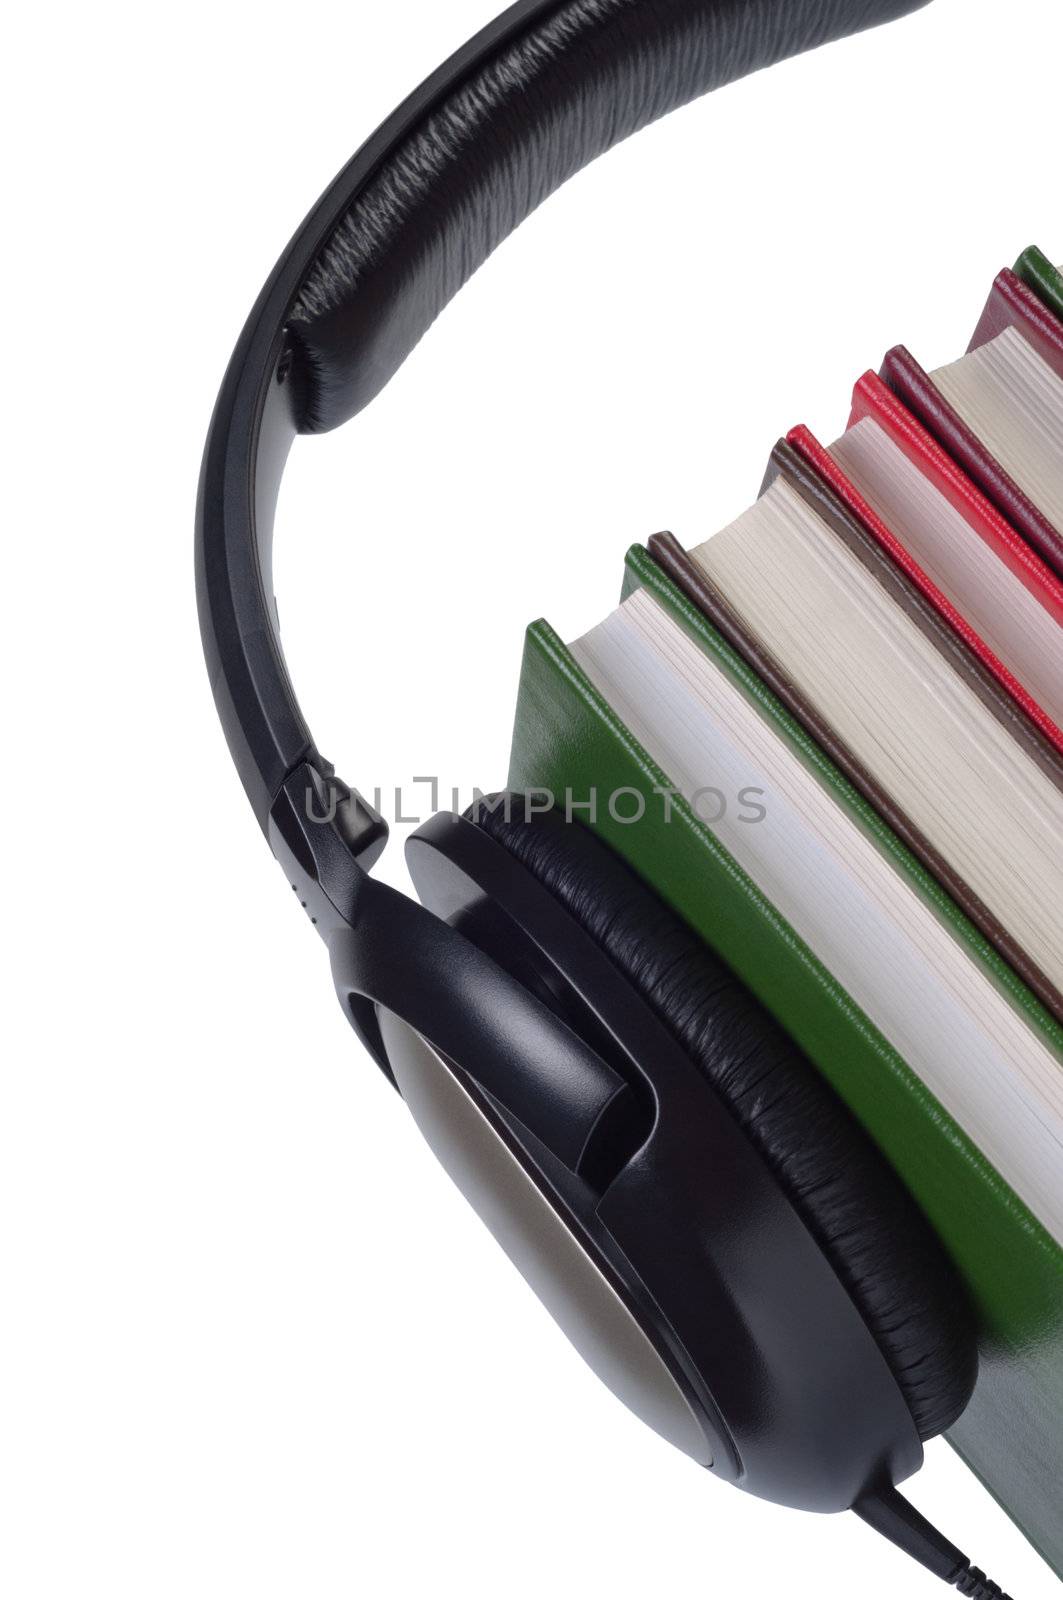 Headphones on books with color covers isolated white background.